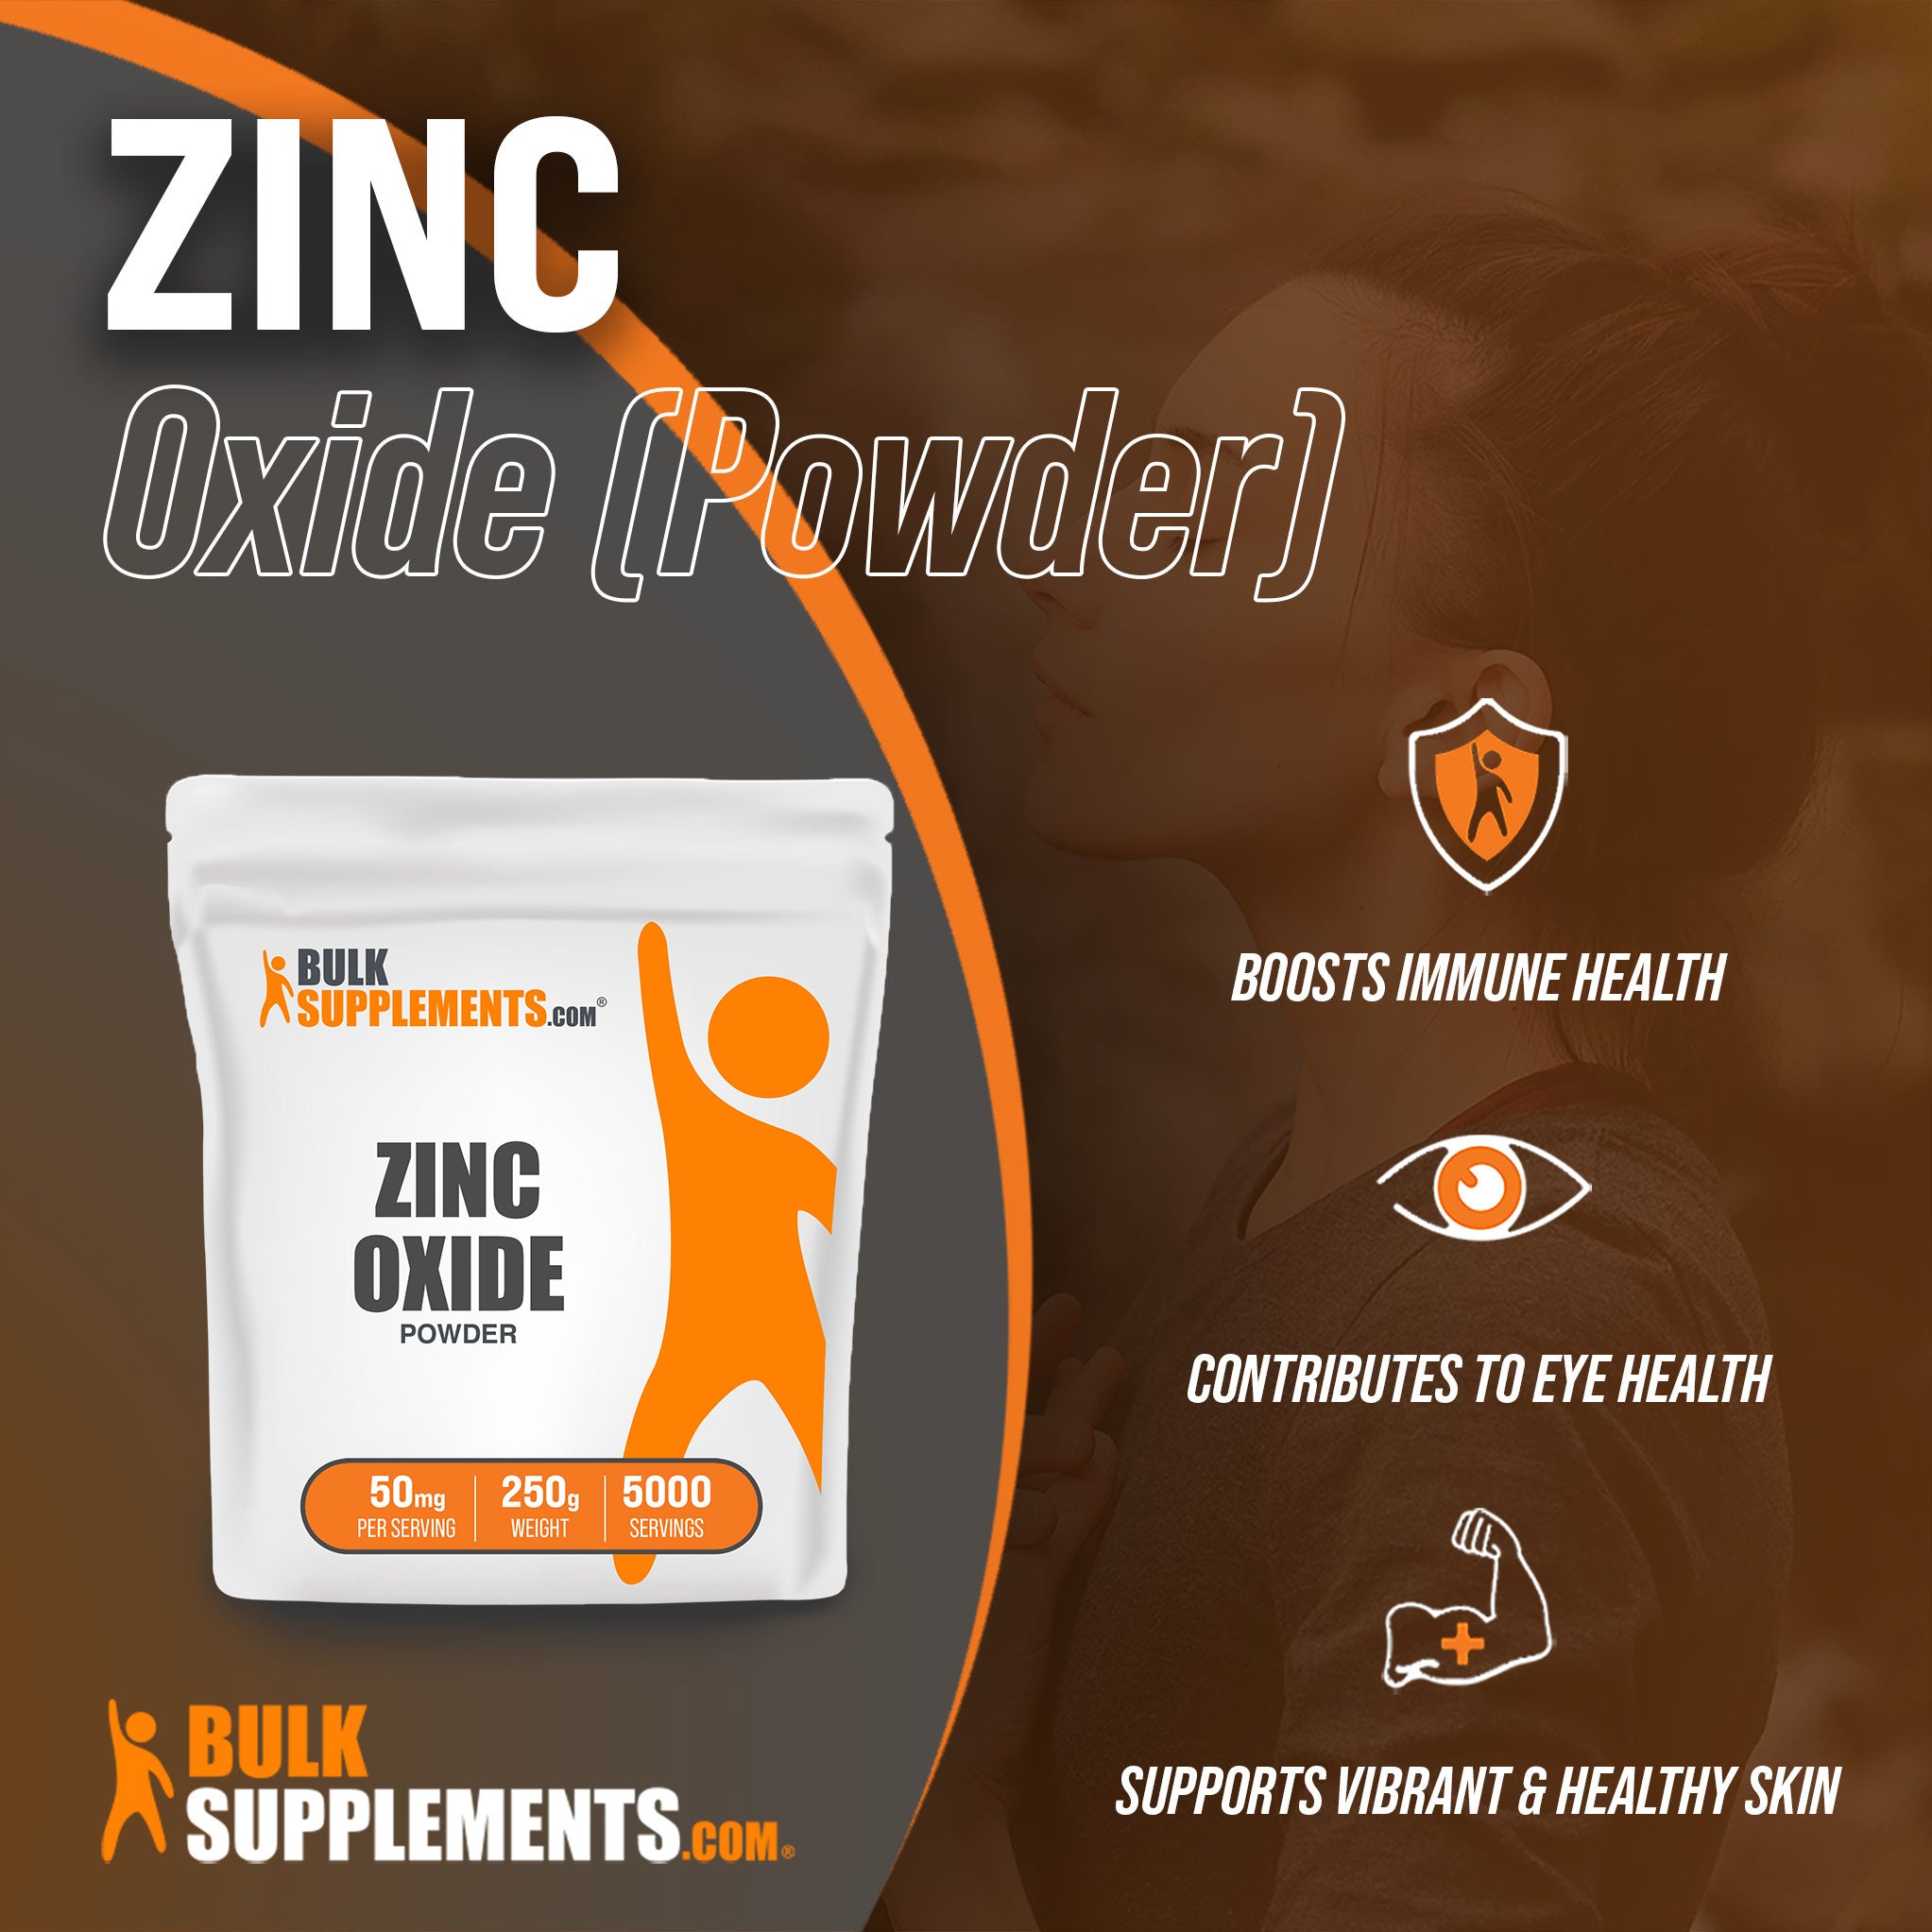 Benefits of Zinc Oxide: boosts immune health, contributes to eye health, supports vibrant and healthy skin